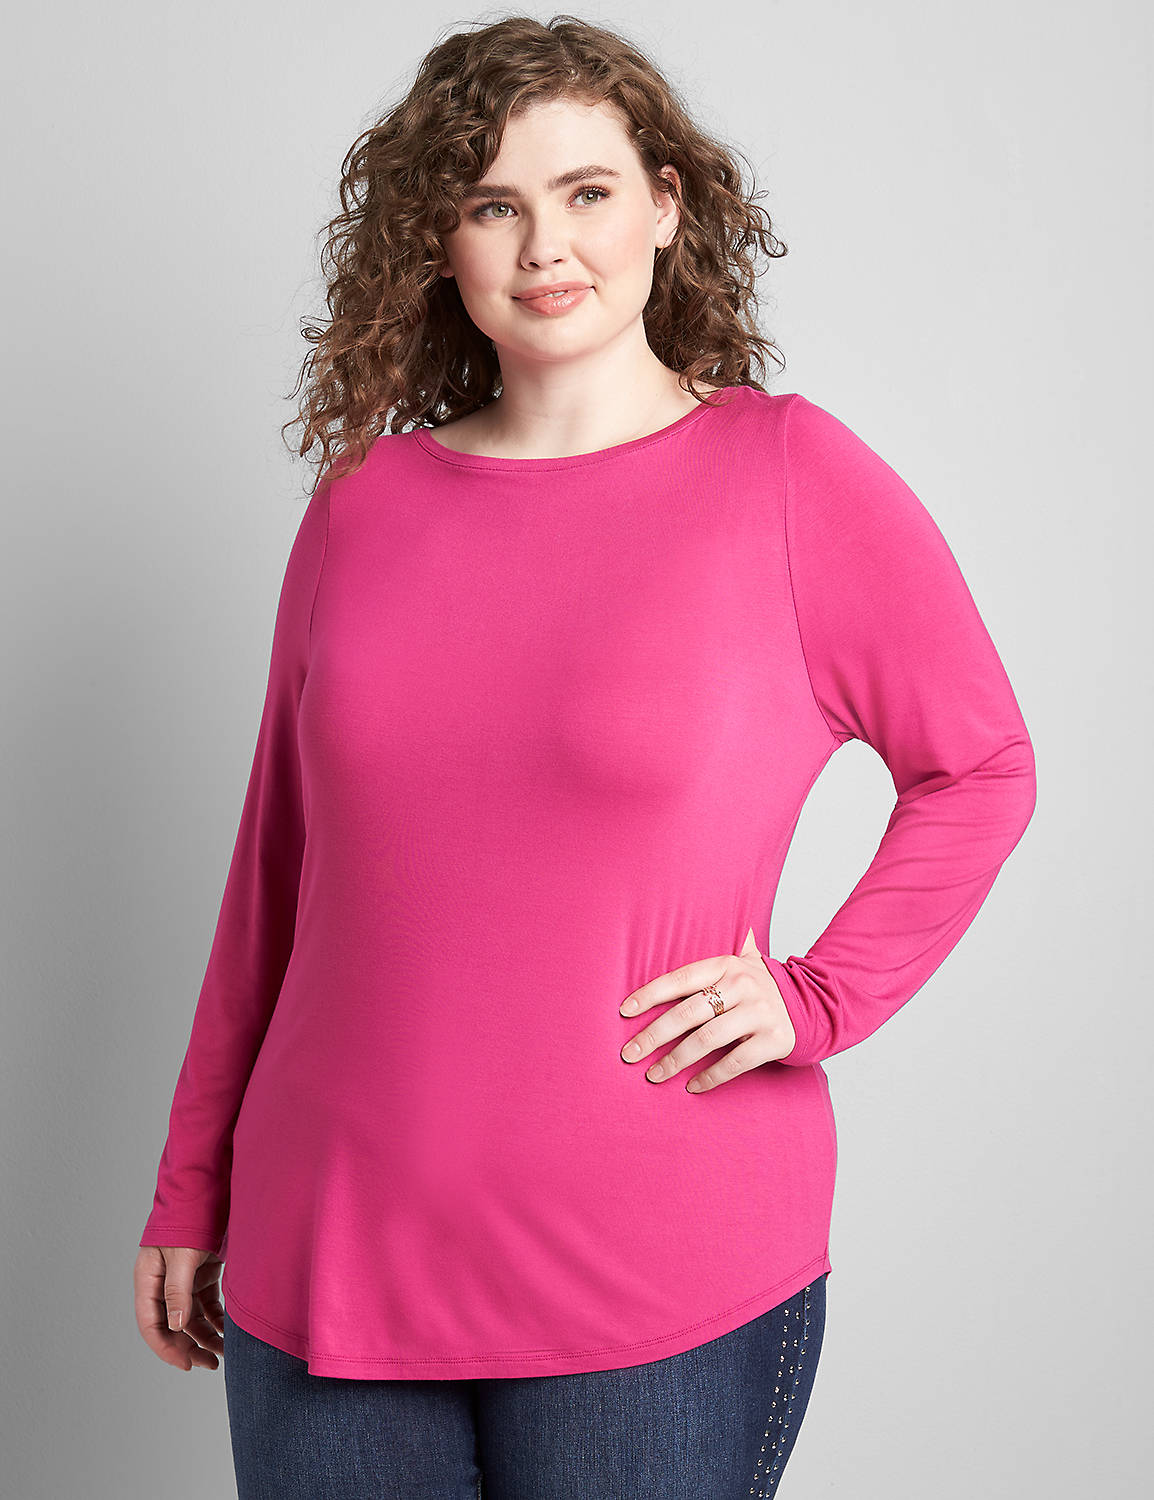 Long Sleeve Boat Neck Curved Hem Printed Tee 1122445 copy of 1122437:PANTONE Fuchsia Red:10/12 Product Image 1